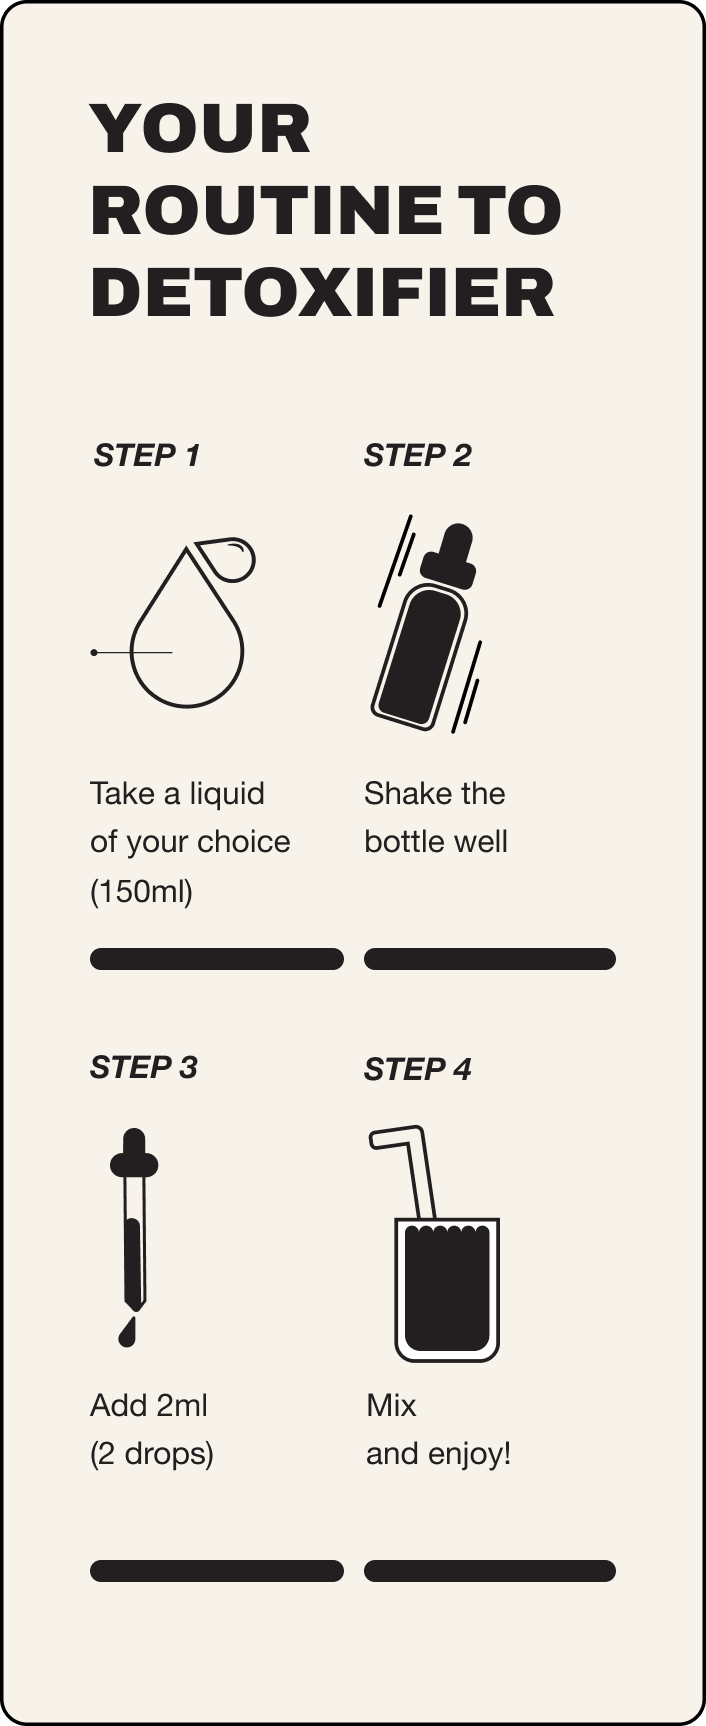 Your guide to Detoxifier. Step 1 take a liquid of your choice 100ml, step 2 shake the bottle well, step 3 add 2ml (2 drops), step 4 mix and enjoy!